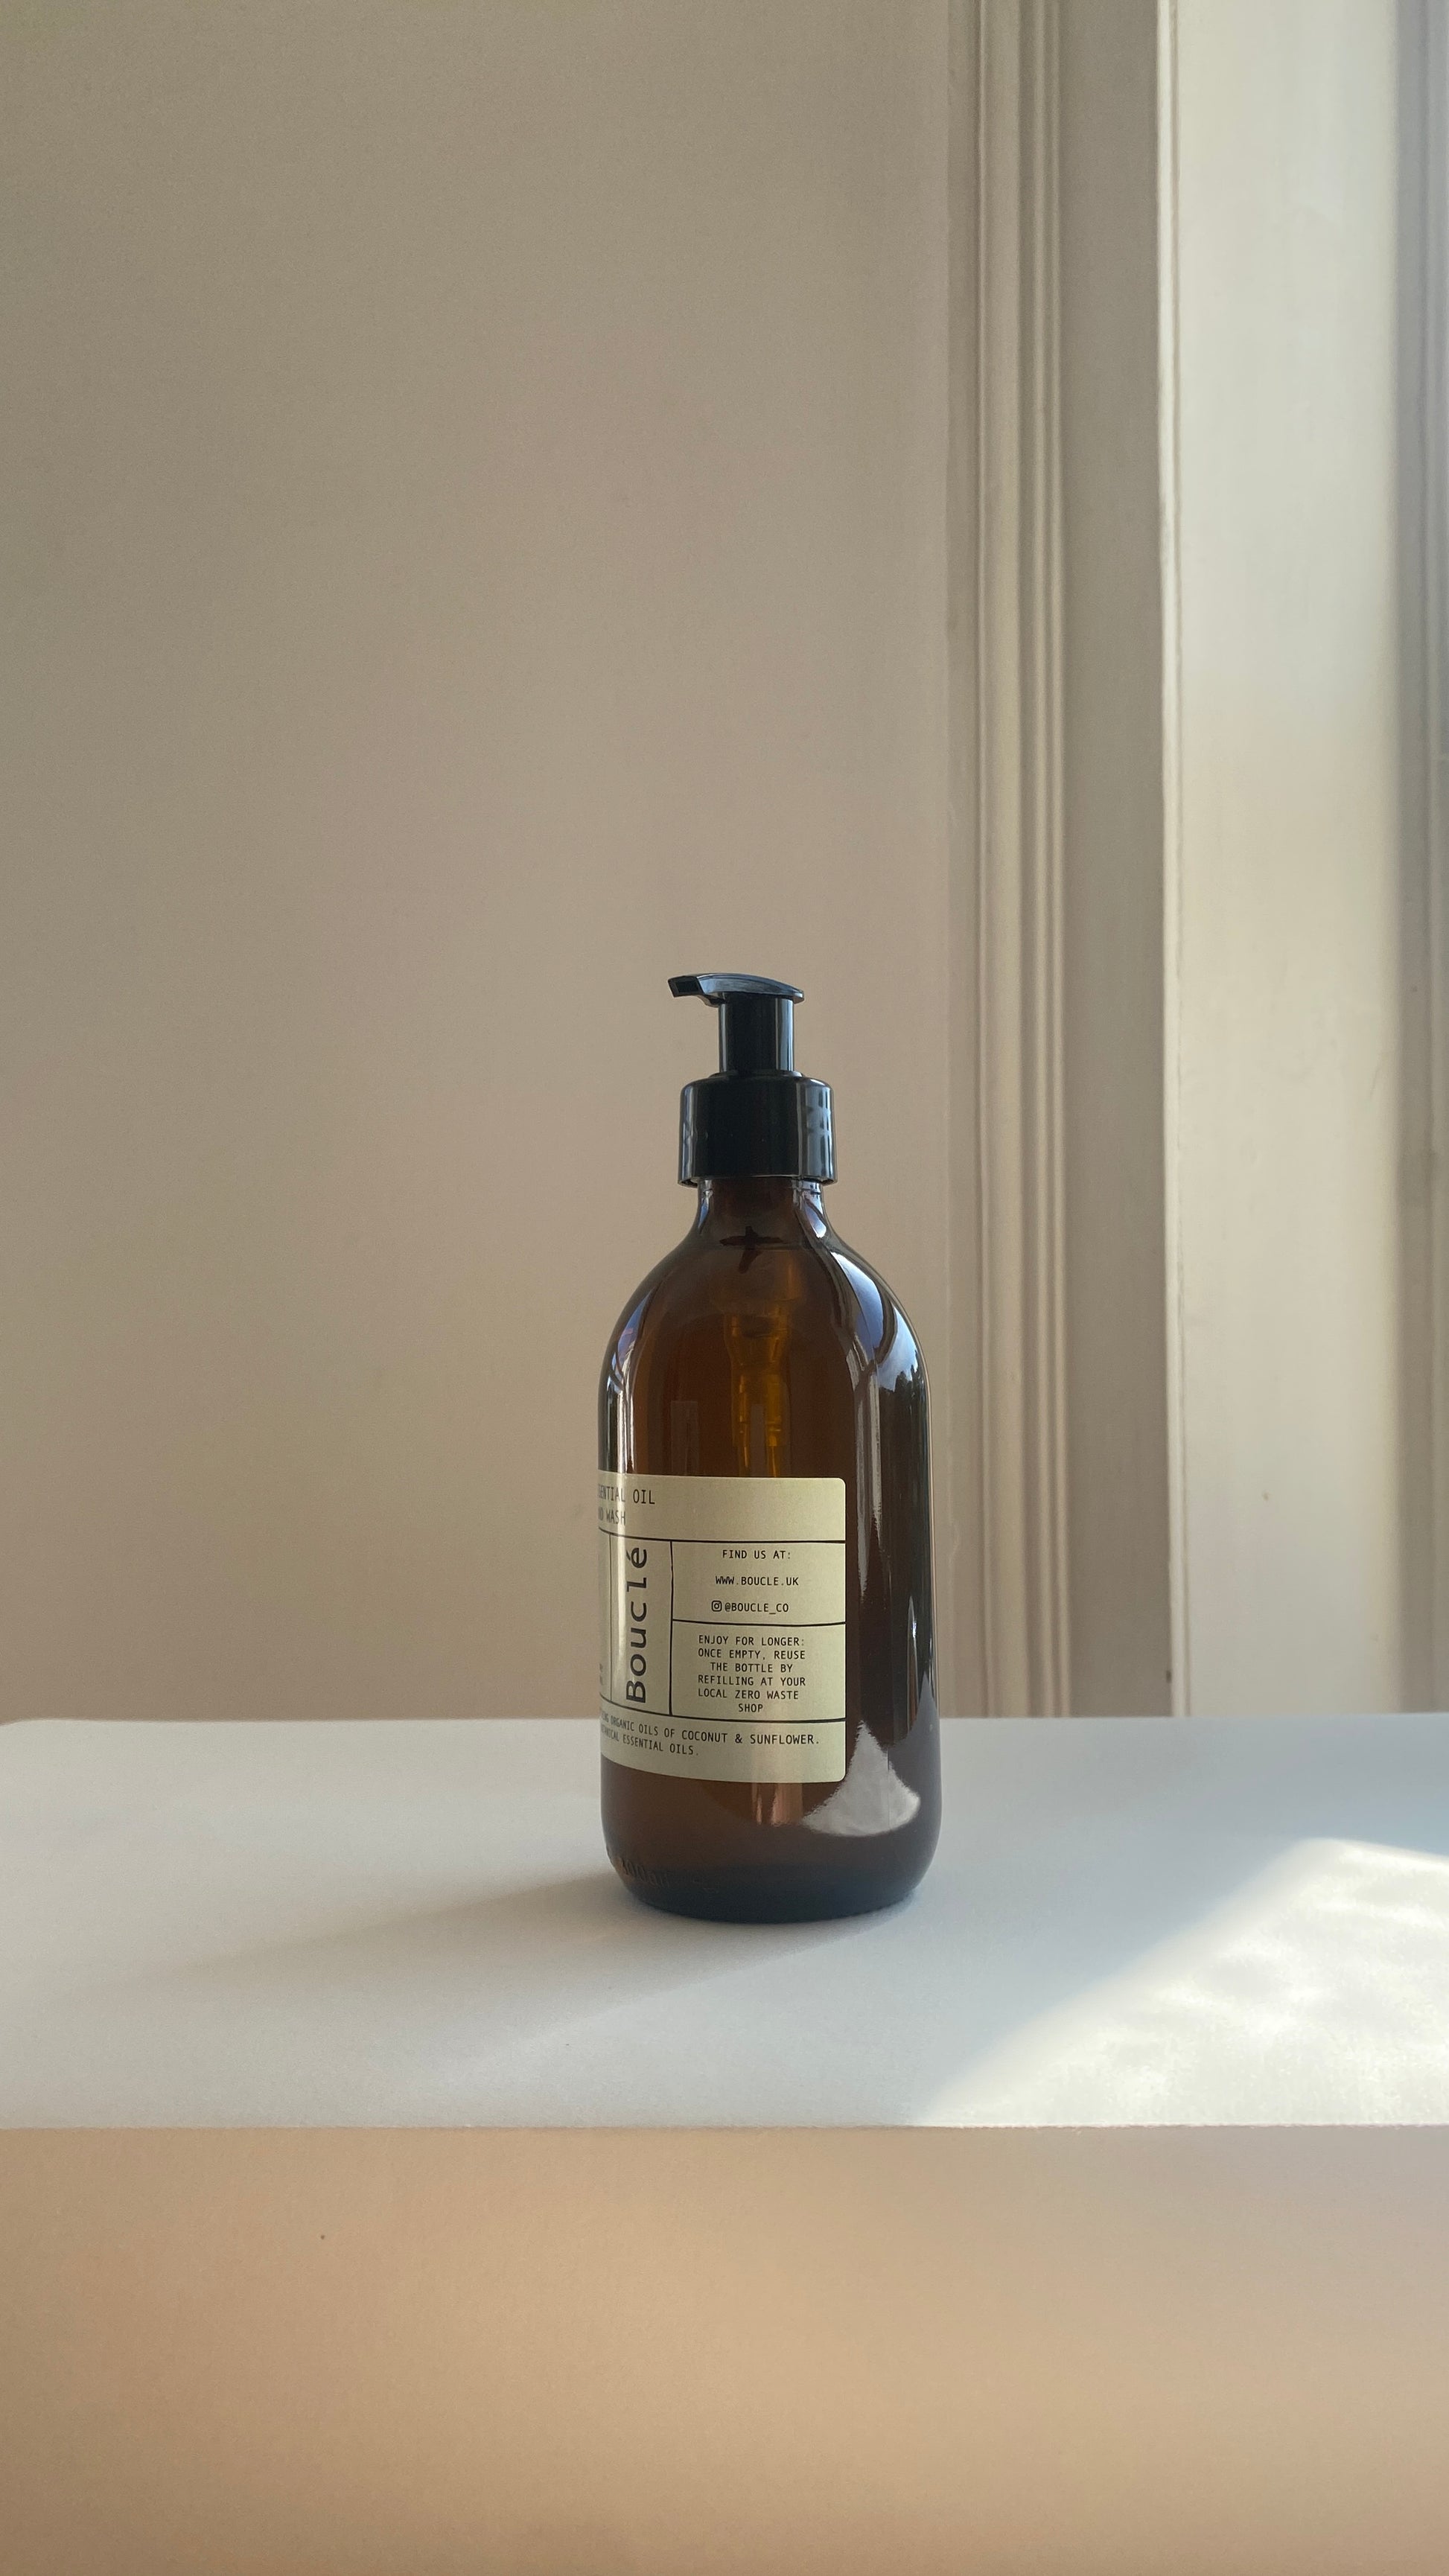 Apothecary style amber glass bottle of vegan natural handwash by Bouclé founded in Hackney in East London. Made with botanical organic ingredients for sensitive skin.